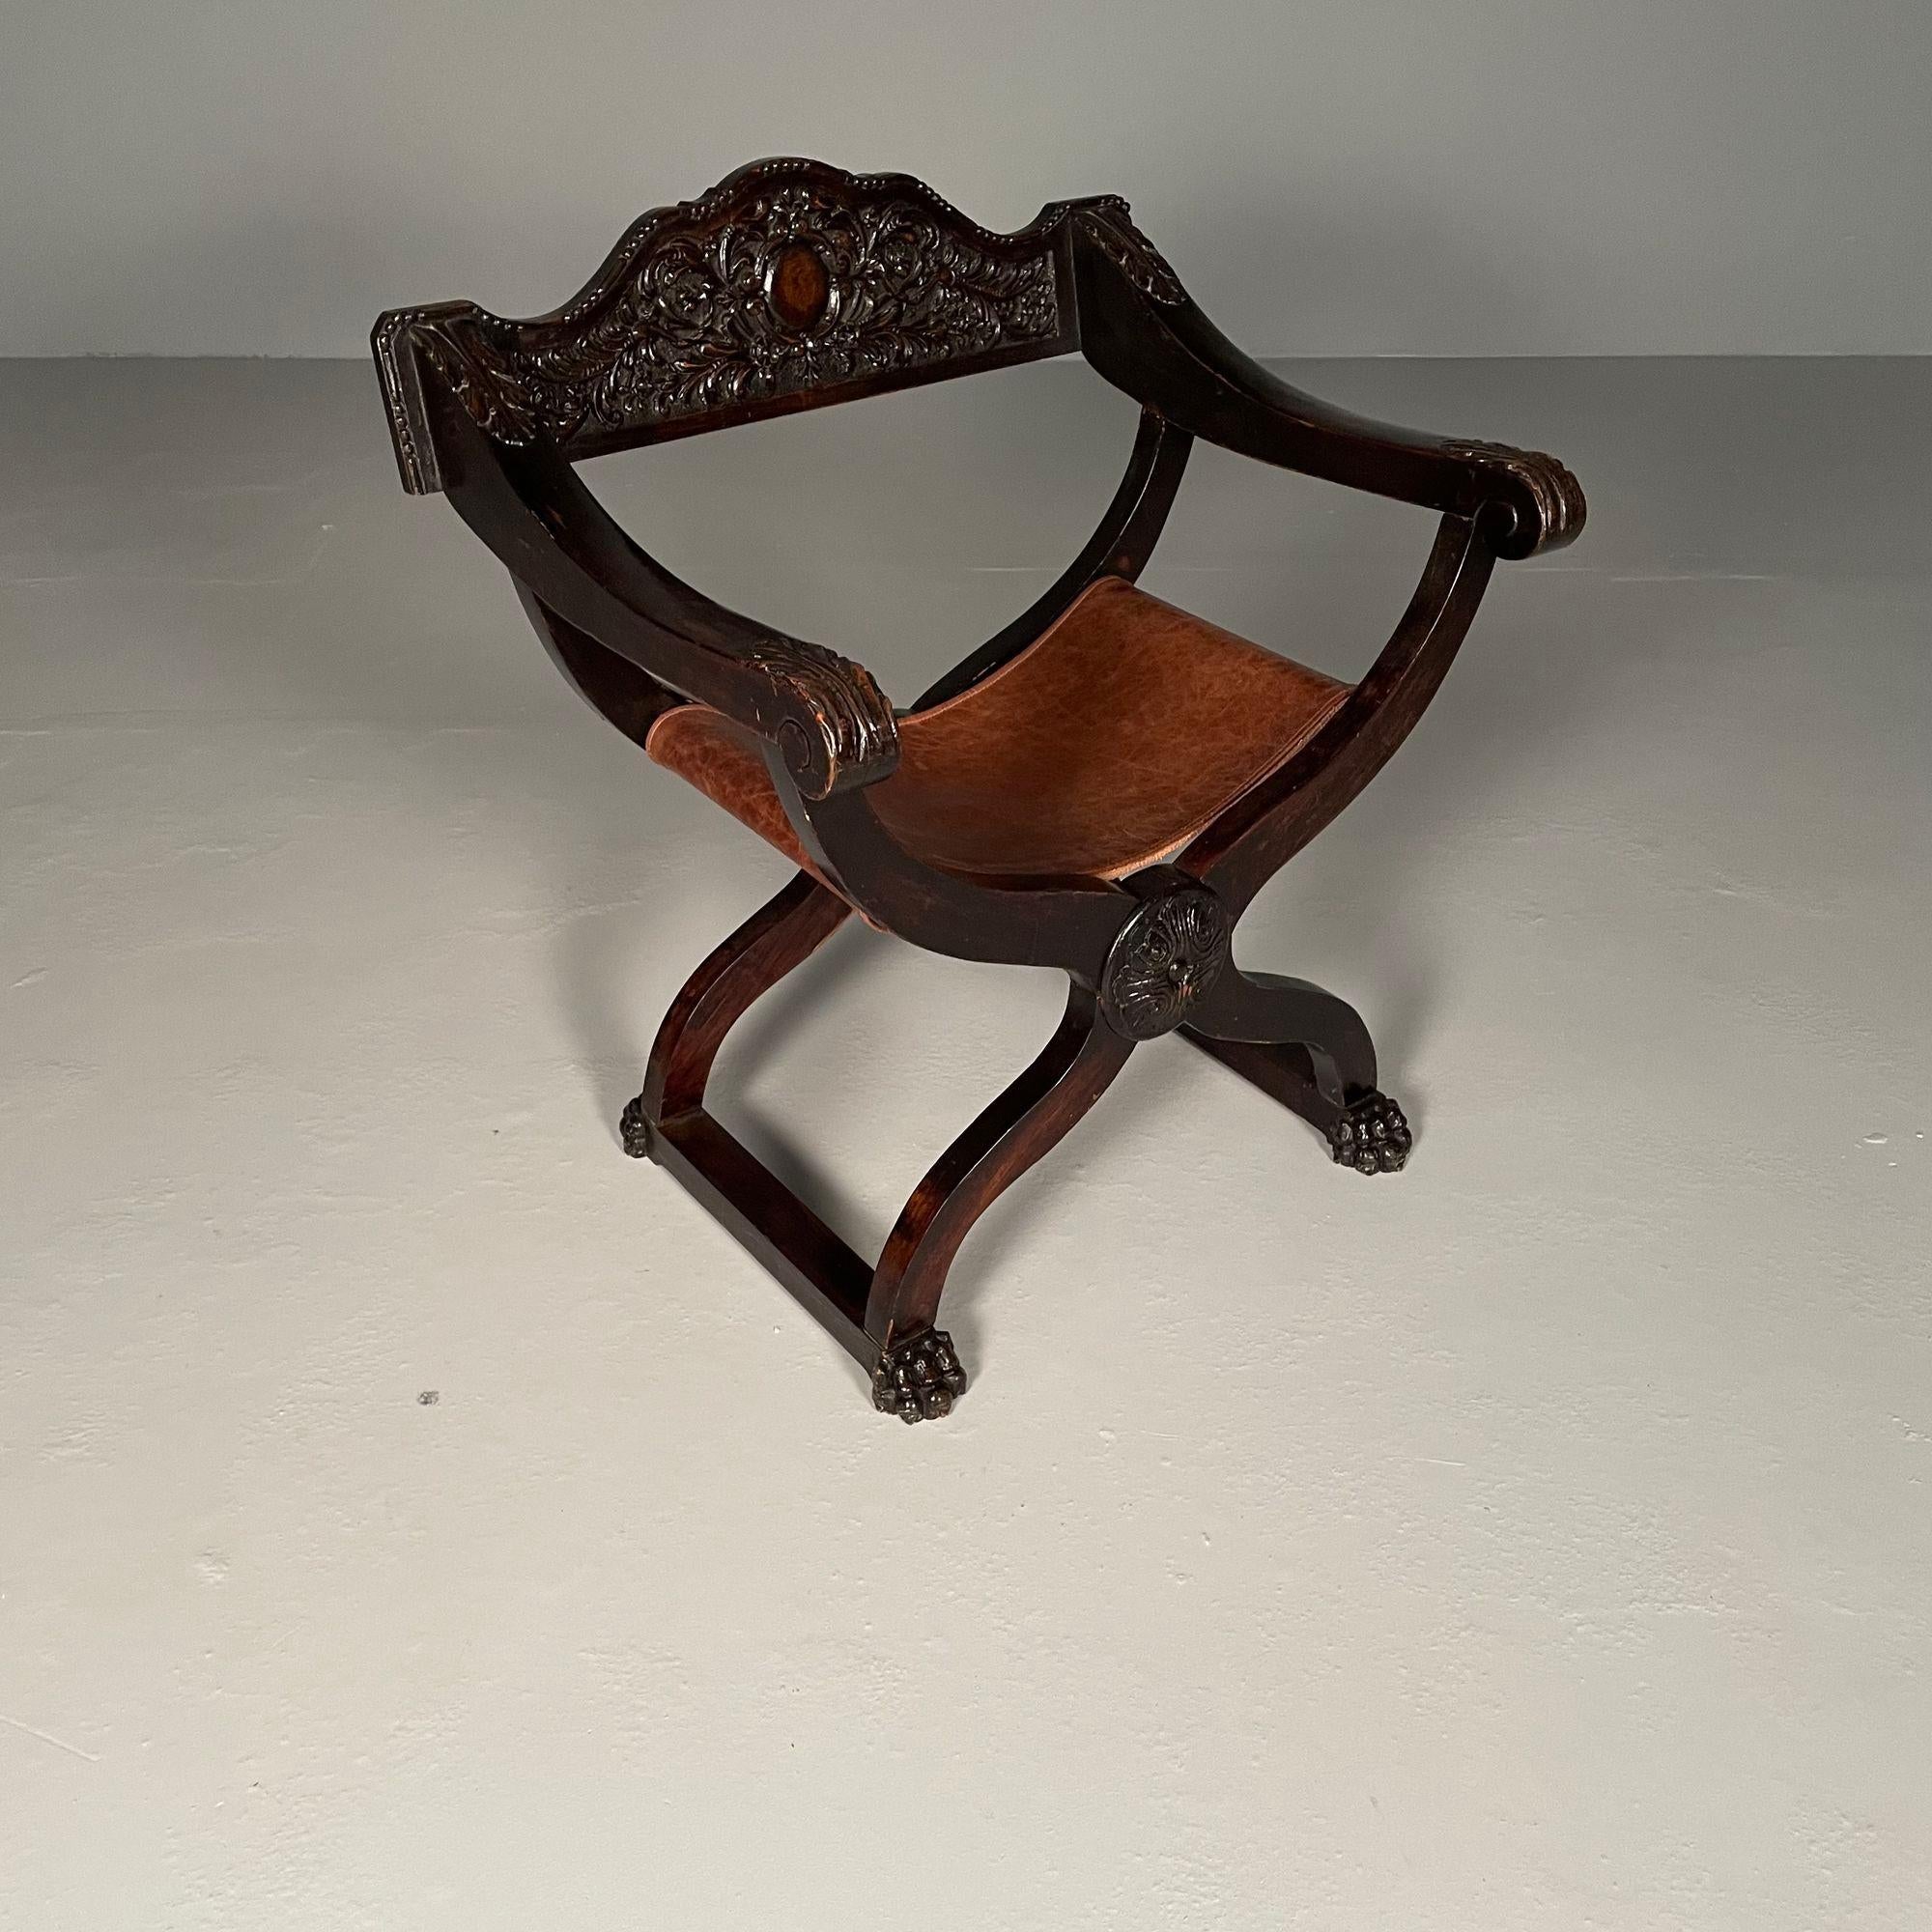 Italian Renaissance Arm / Office Chair, Carved, Leather Seat, 19th Century For Sale 16